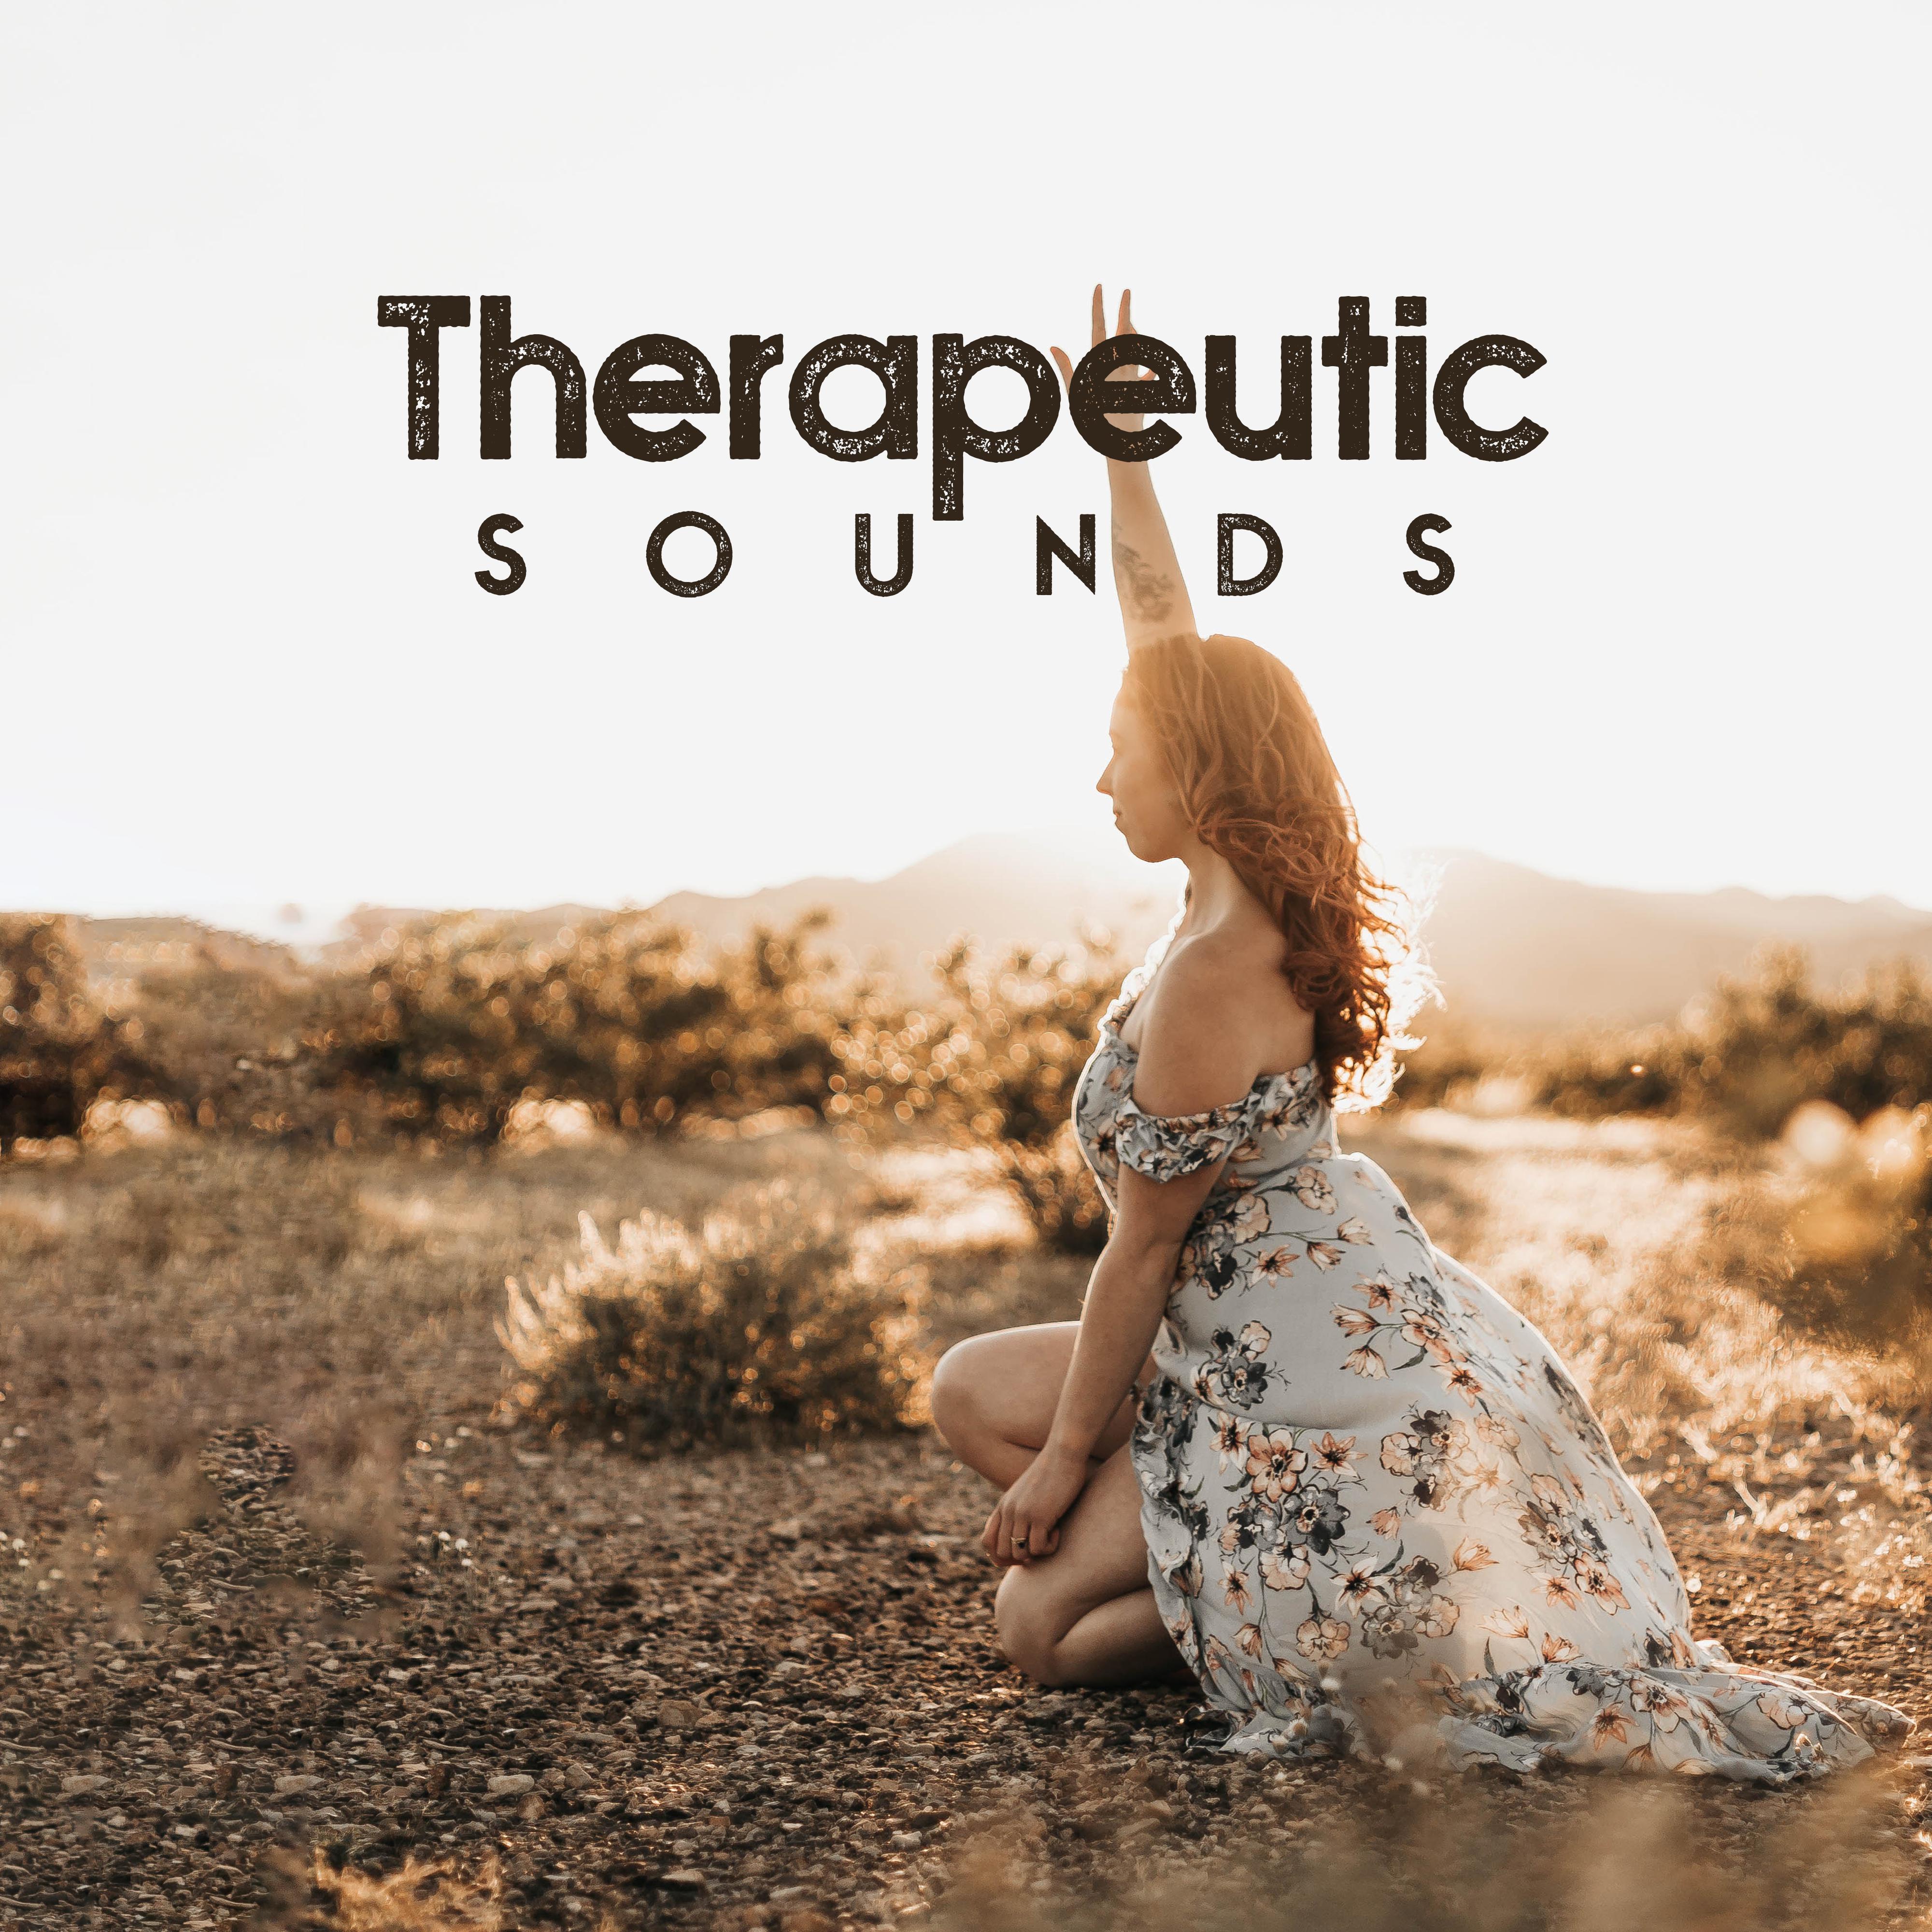 Therapeutic Sounds: 15 Relaxing Melodies for Deep Harmony, Relaxing Vibes, New Age, Music Therapy, Music Zone, Zen